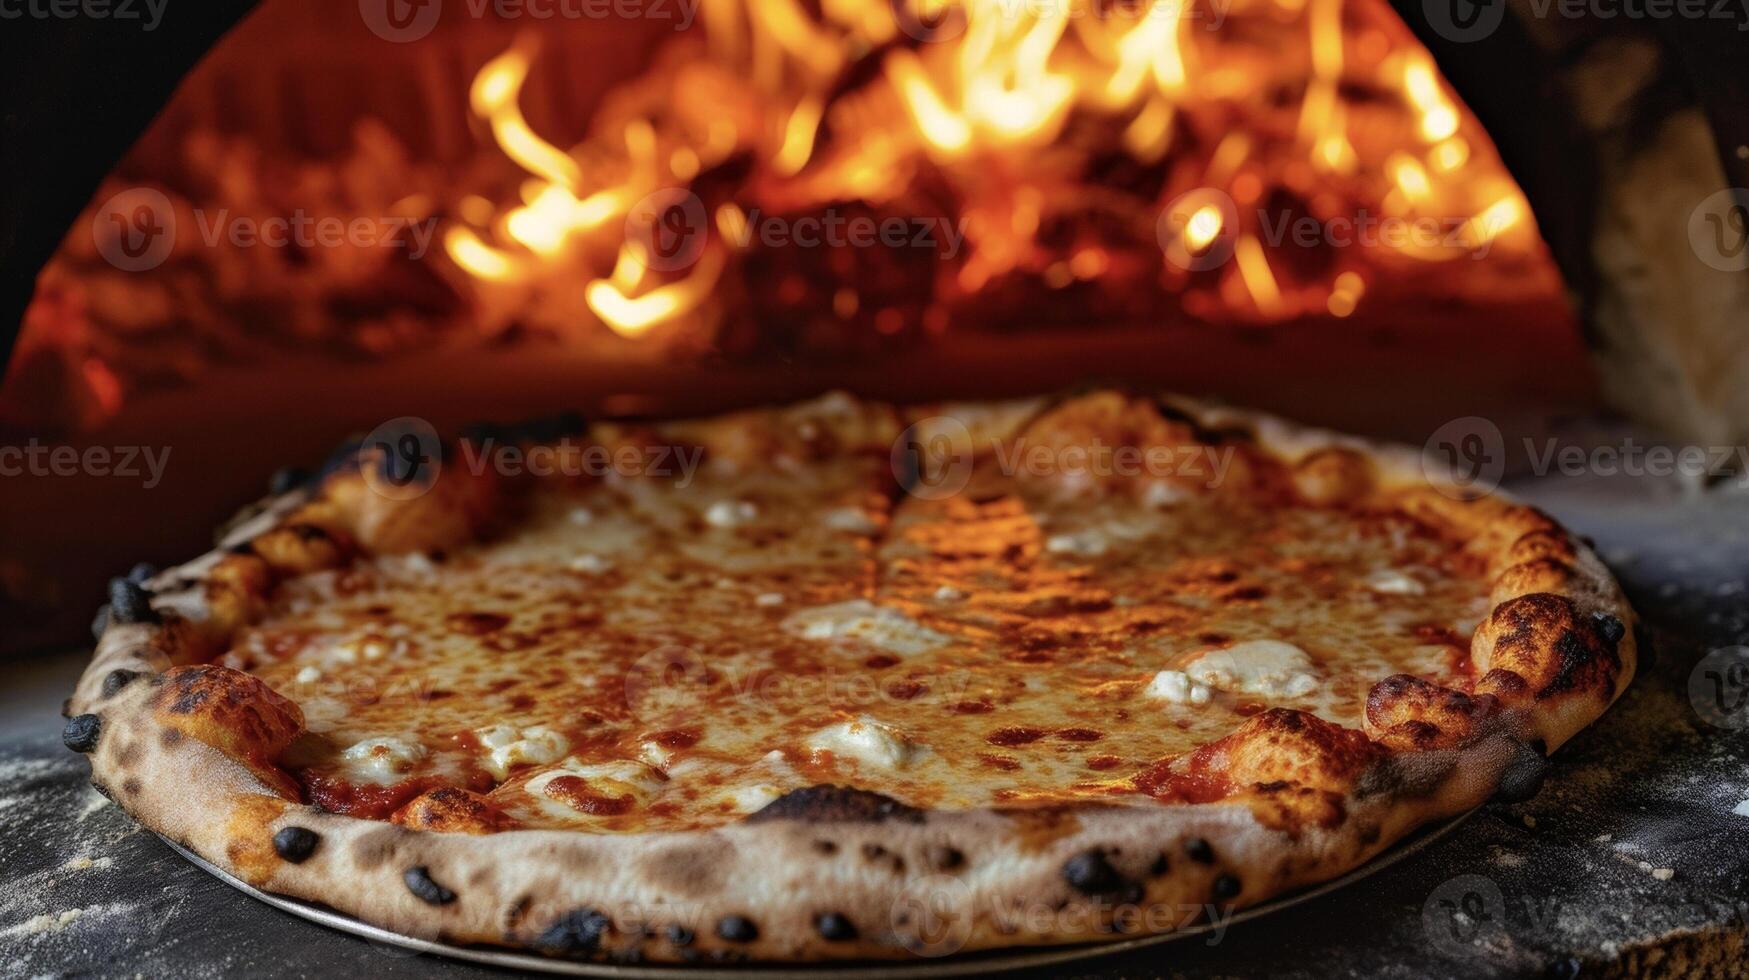 The crispness of the crust and the gooeyness of the cheese are a match made in heaven in this woodfired pizza straight from the fiery depths of the oven photo